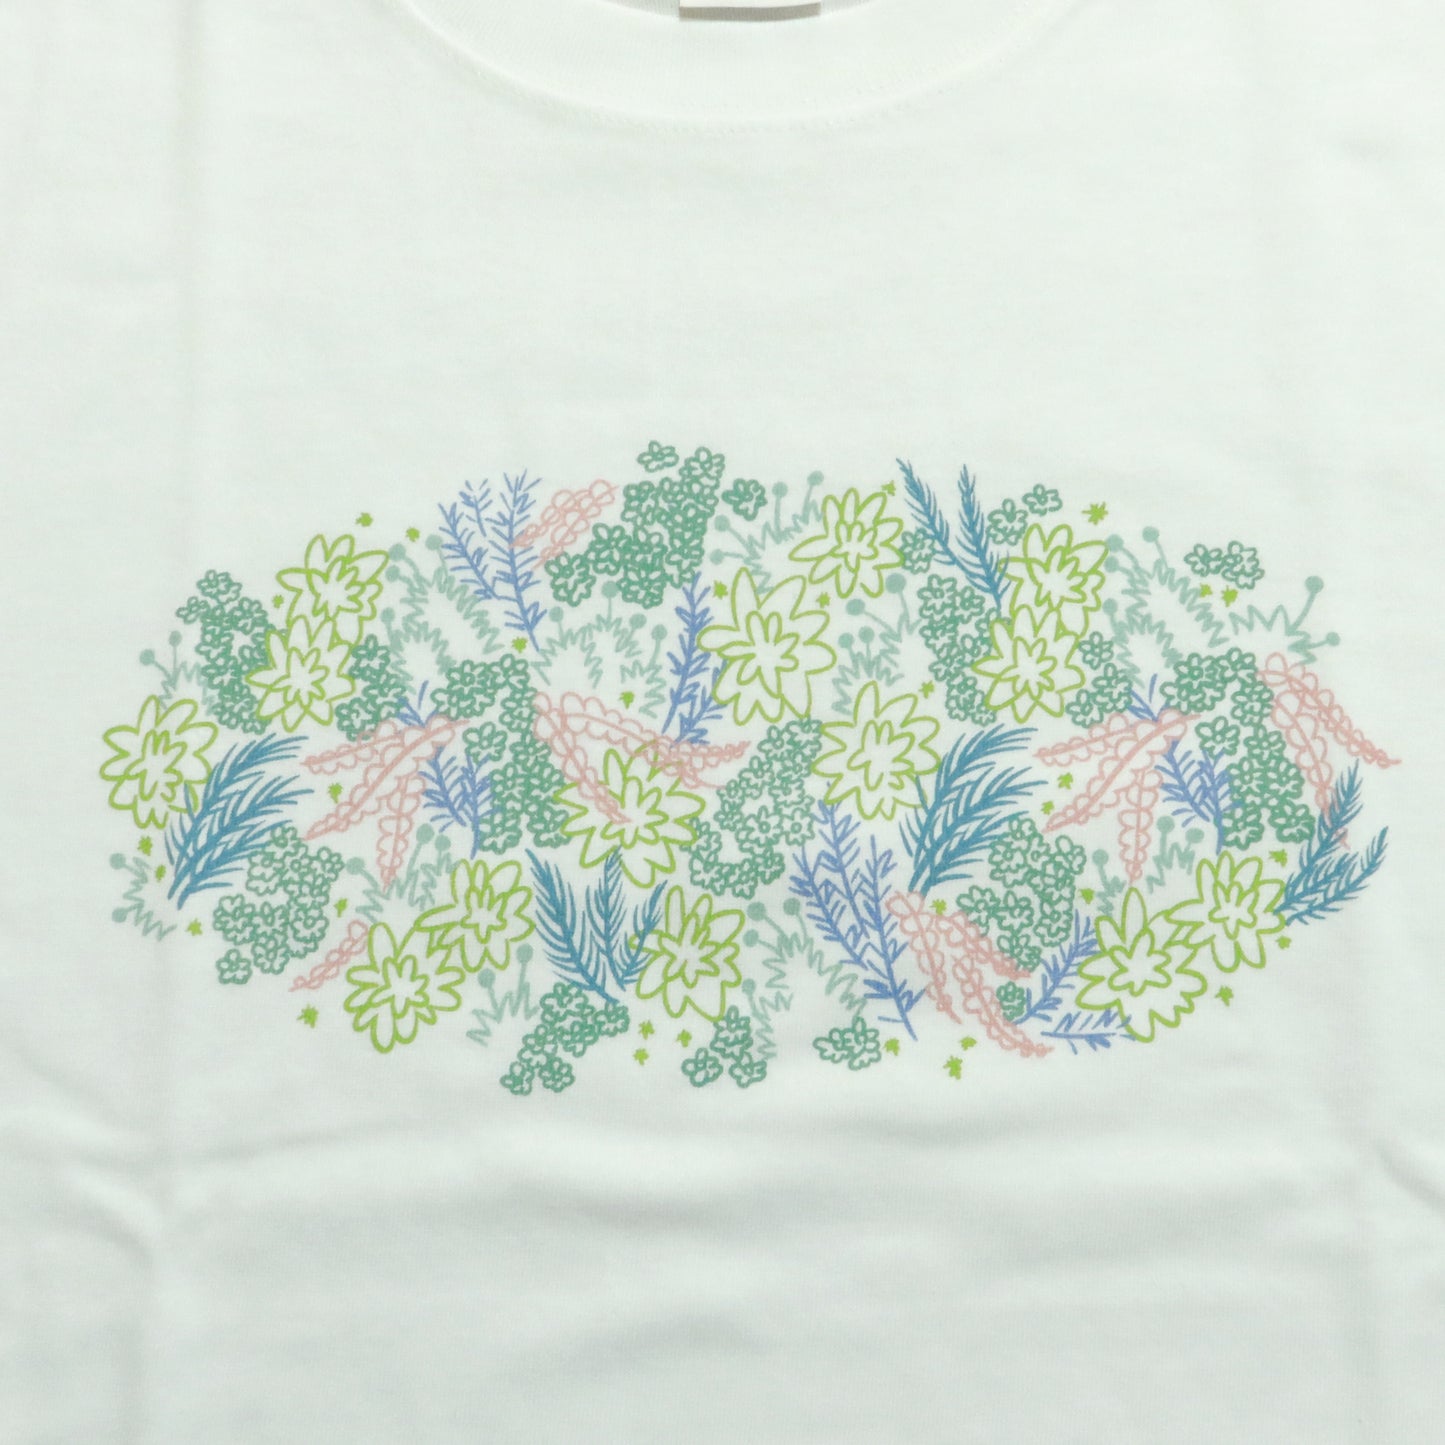 Tシャツ【苔の森】木漏れ日